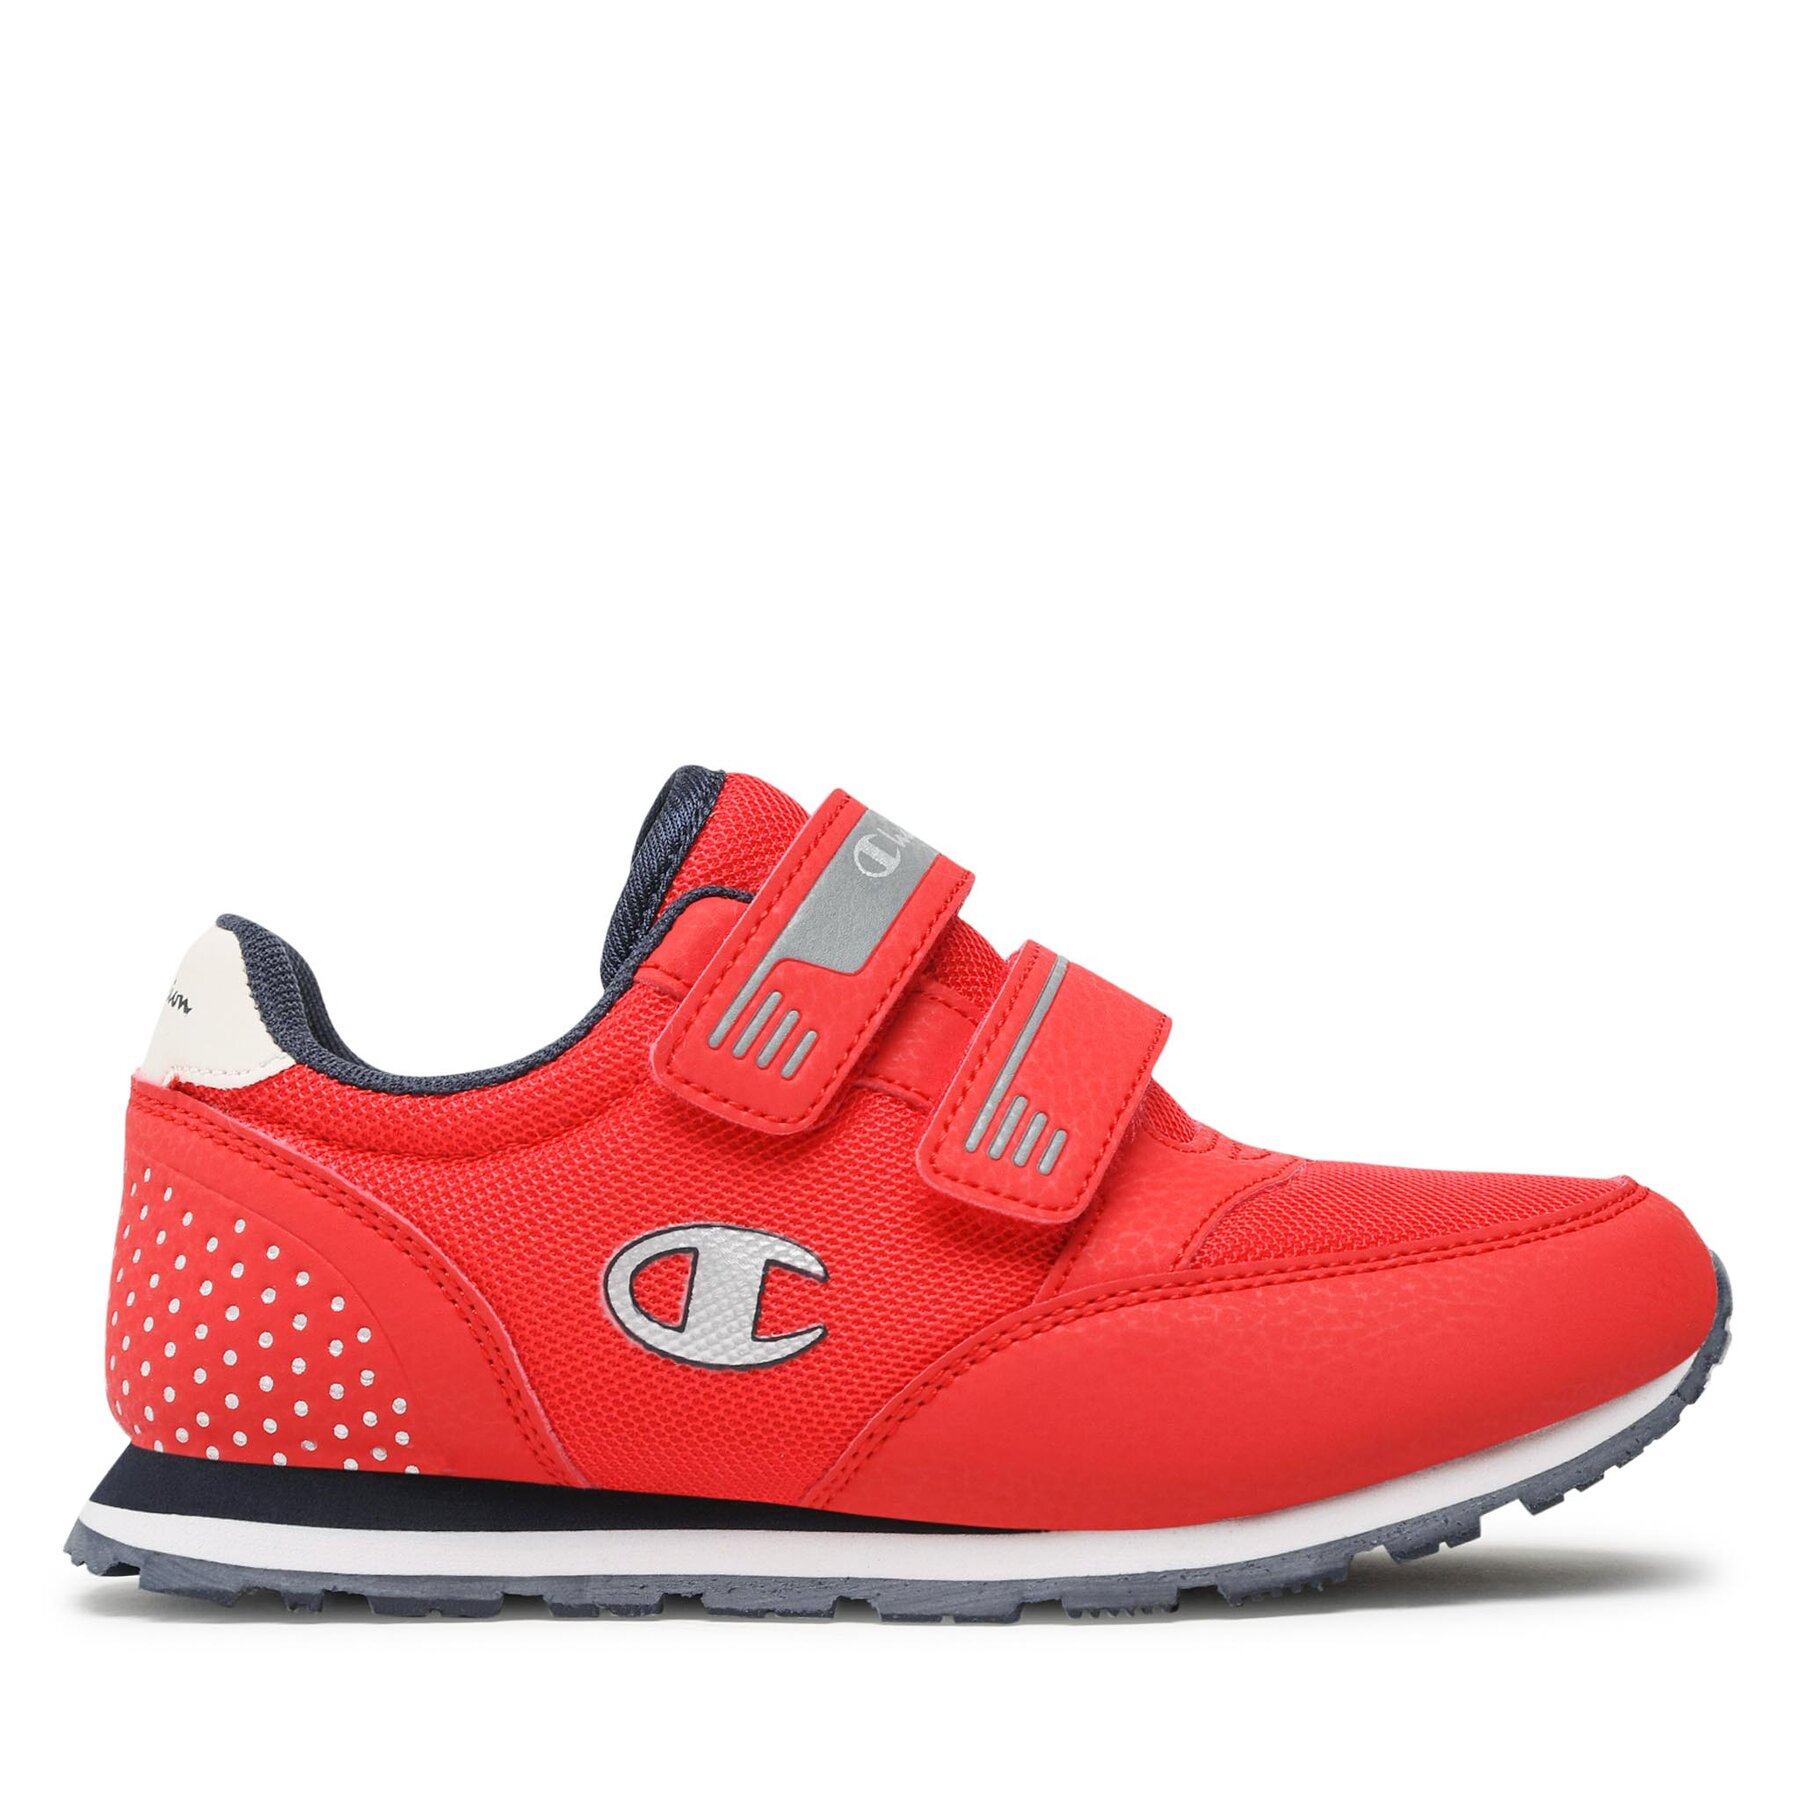 Sneakers Champion Champ Evolve M S32618-CHA-RS001 Red/Nny von Champion